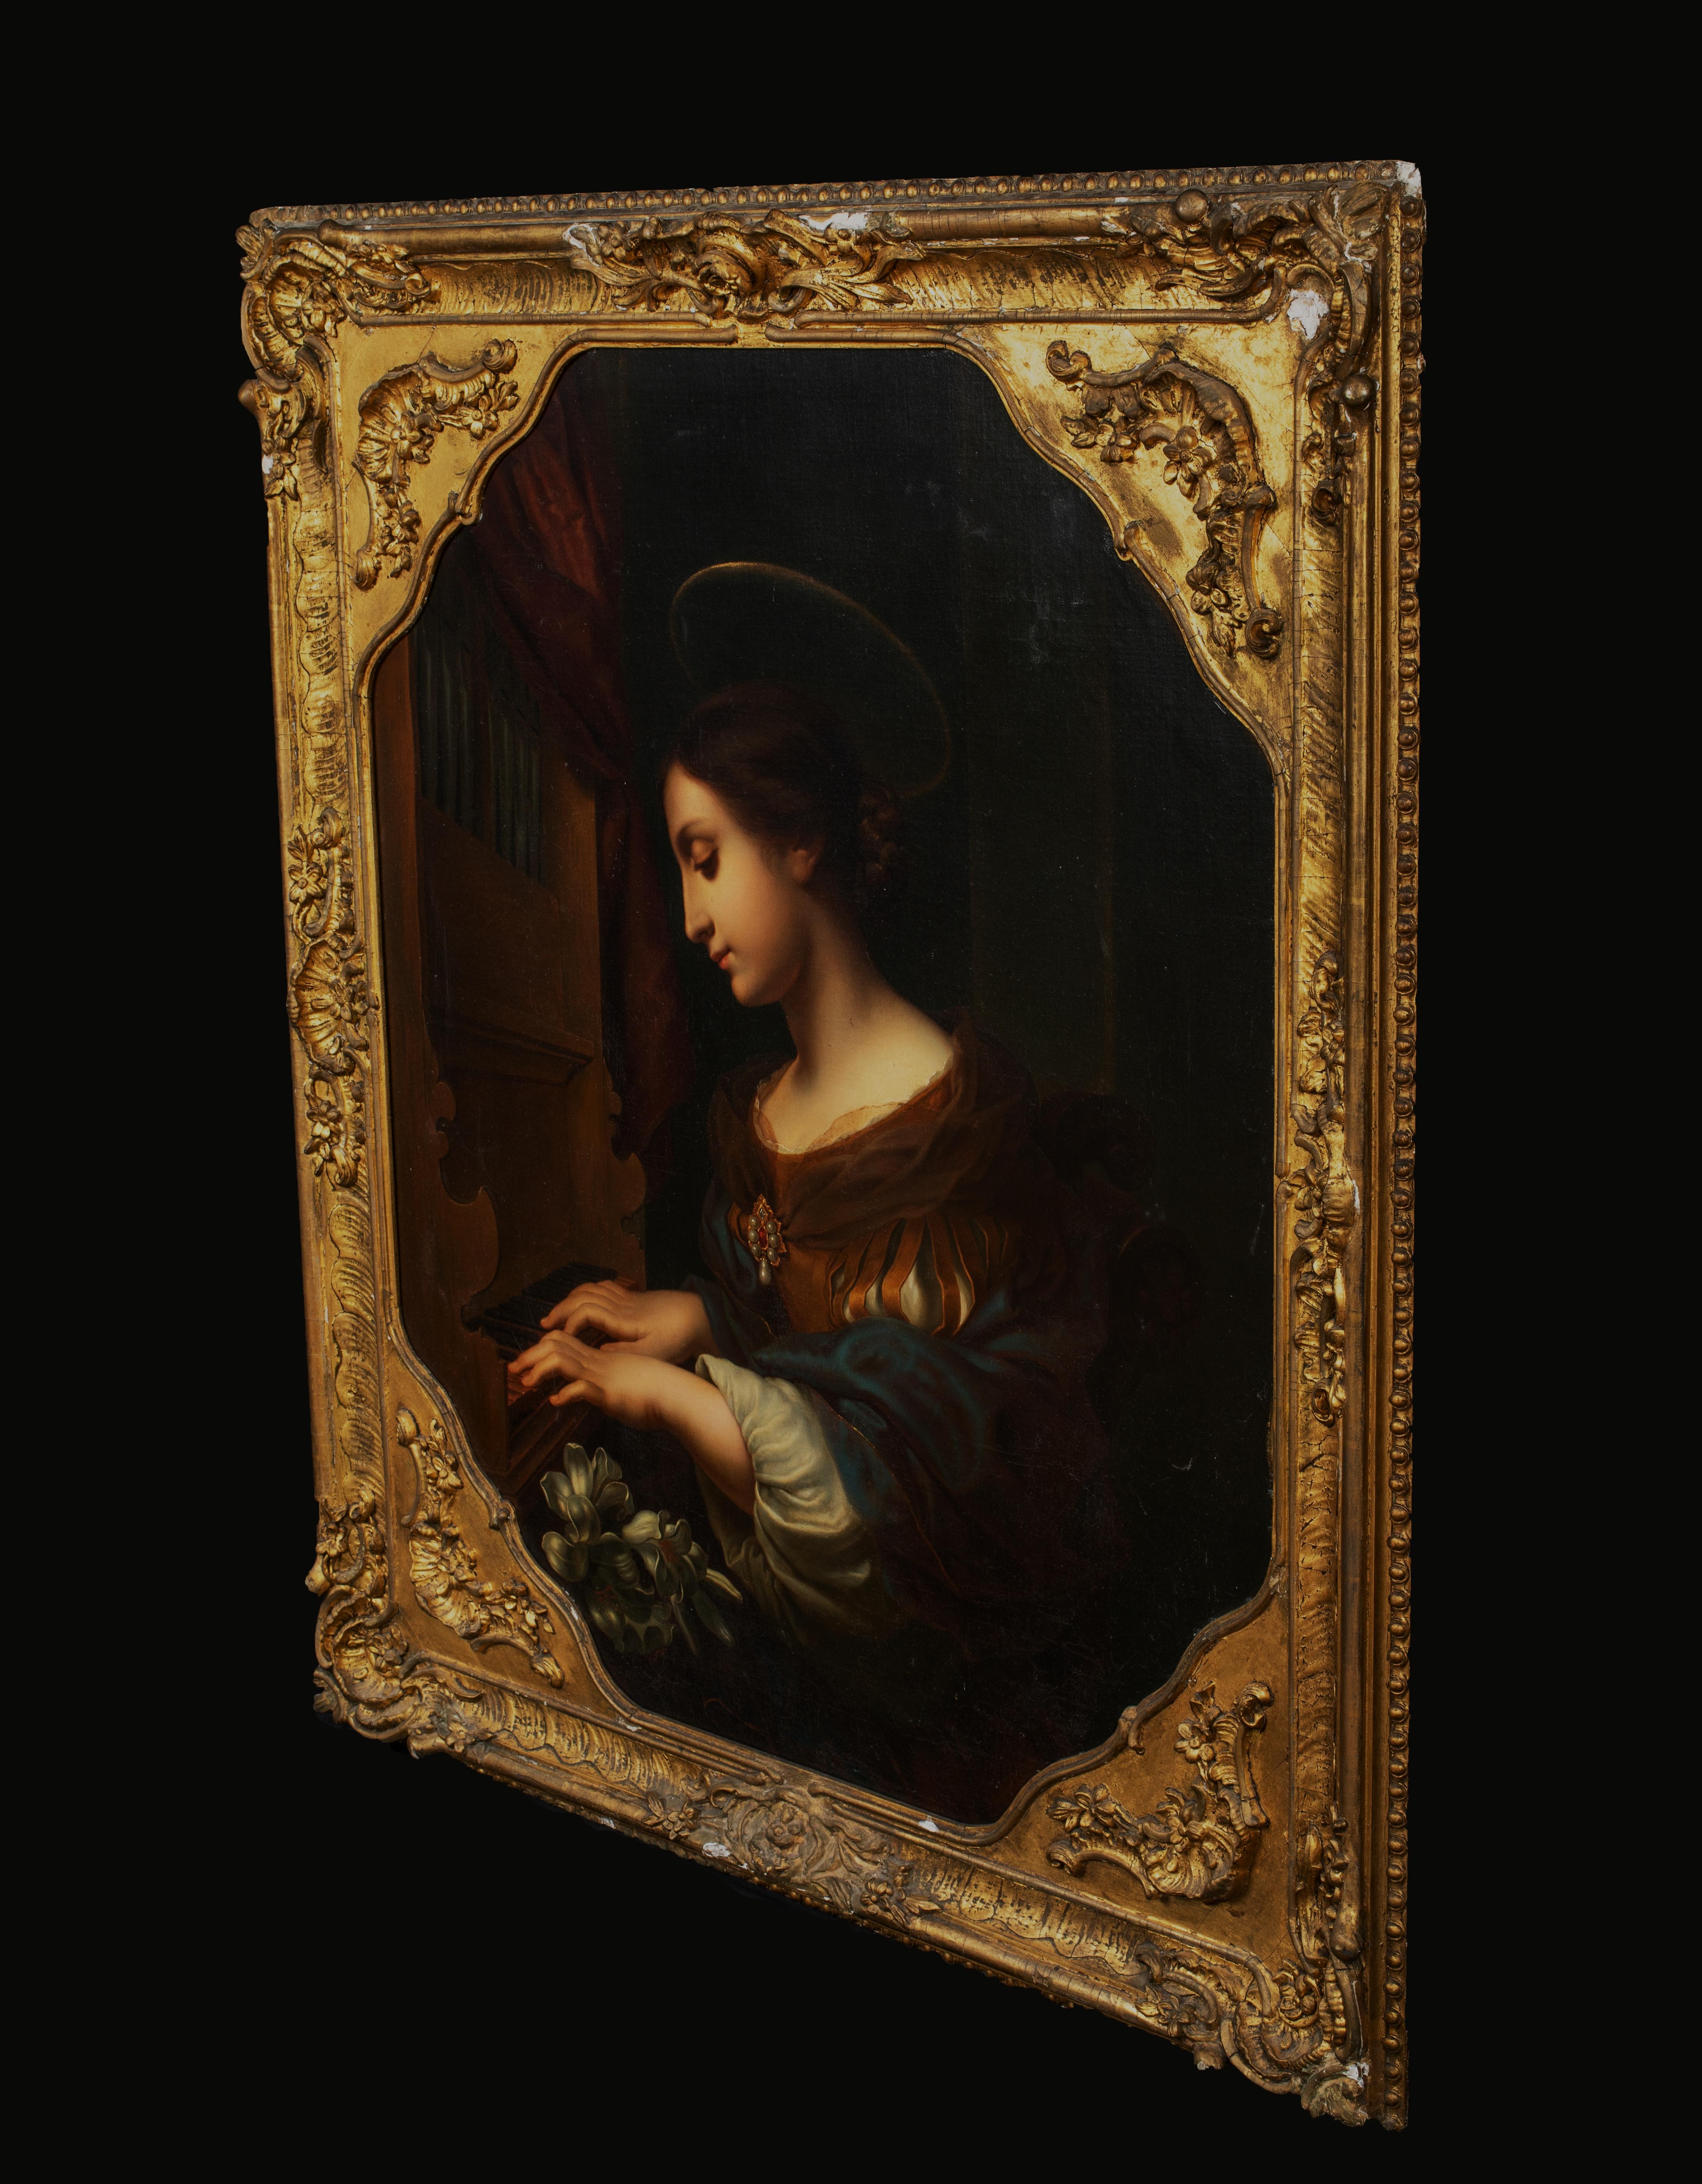 Saint Cecilia Playing The Piano, 17th Century

circle of Carlo DOLCI (1616-1686)

Large 17th/18th century Italian Old Master depiction of Saint Cecilia Playing the Piano, oil on canvas. Magnificent large depiction of the female saint at the piano in